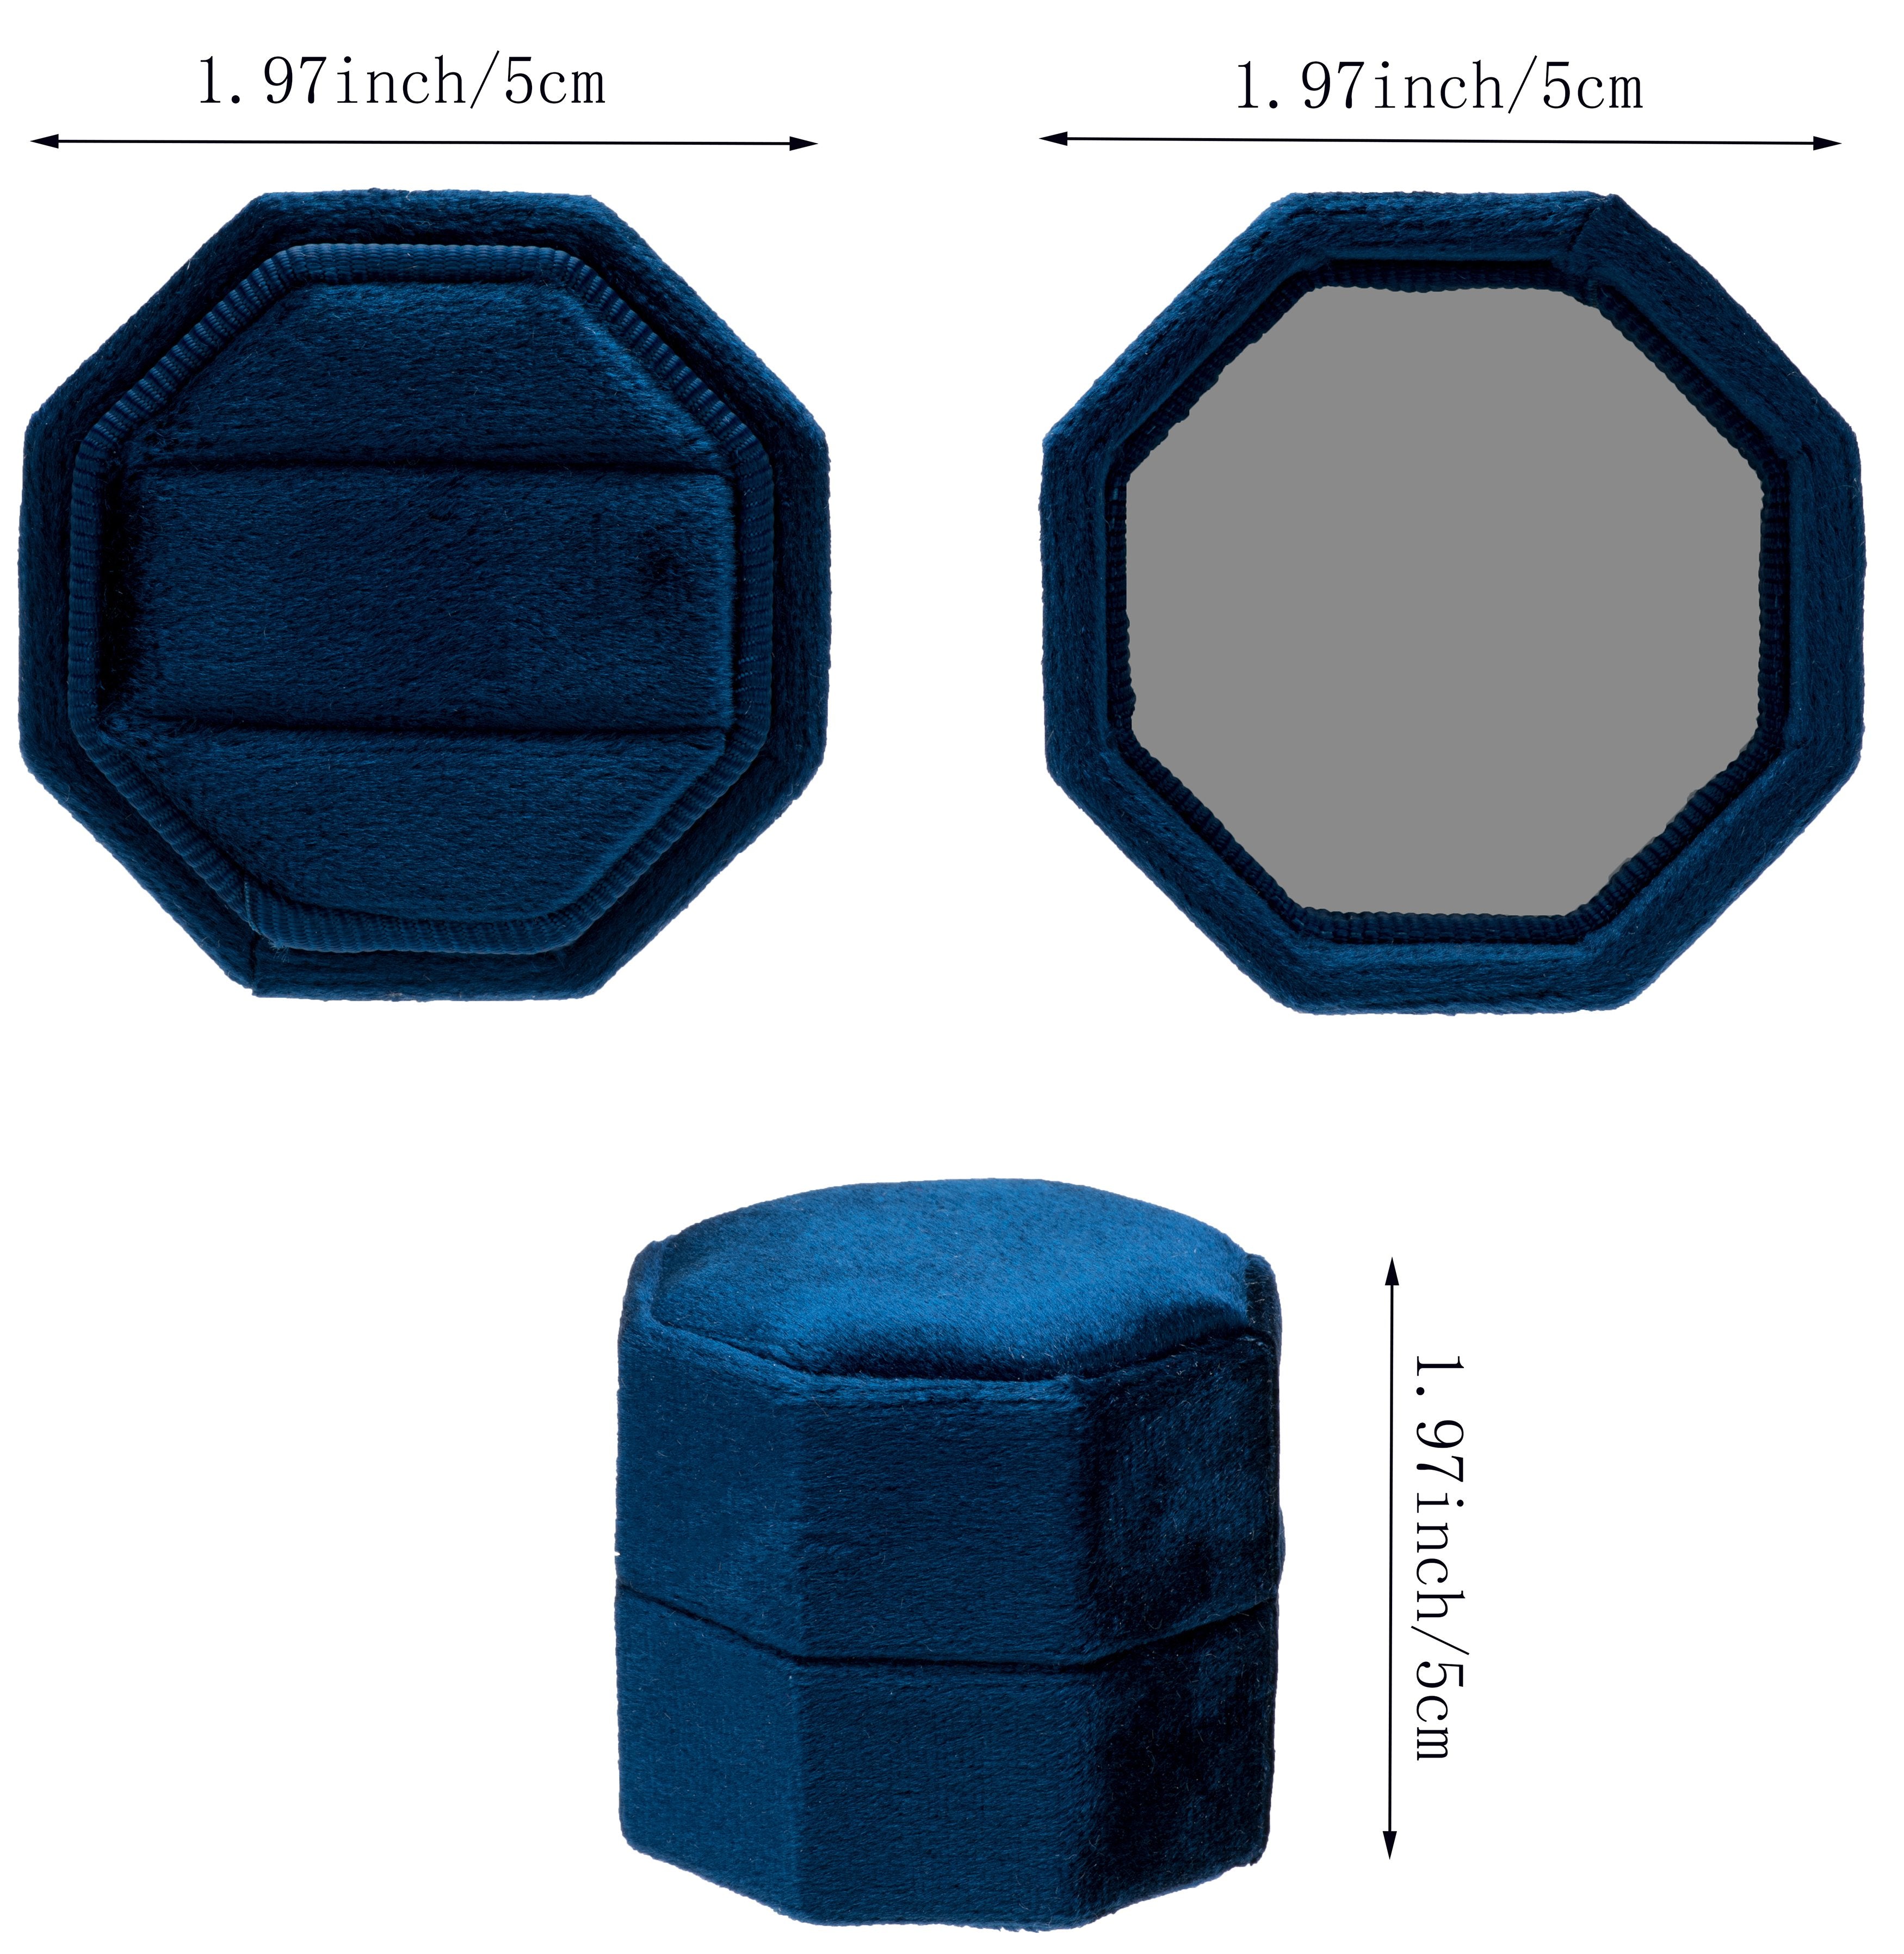 Premium Velvet Ring Box for Proposal Engagement Wedding Ceremony - Equilateral Octagon Vintage Double Ring Display Holder with Detachable Lid (Dark Blue)